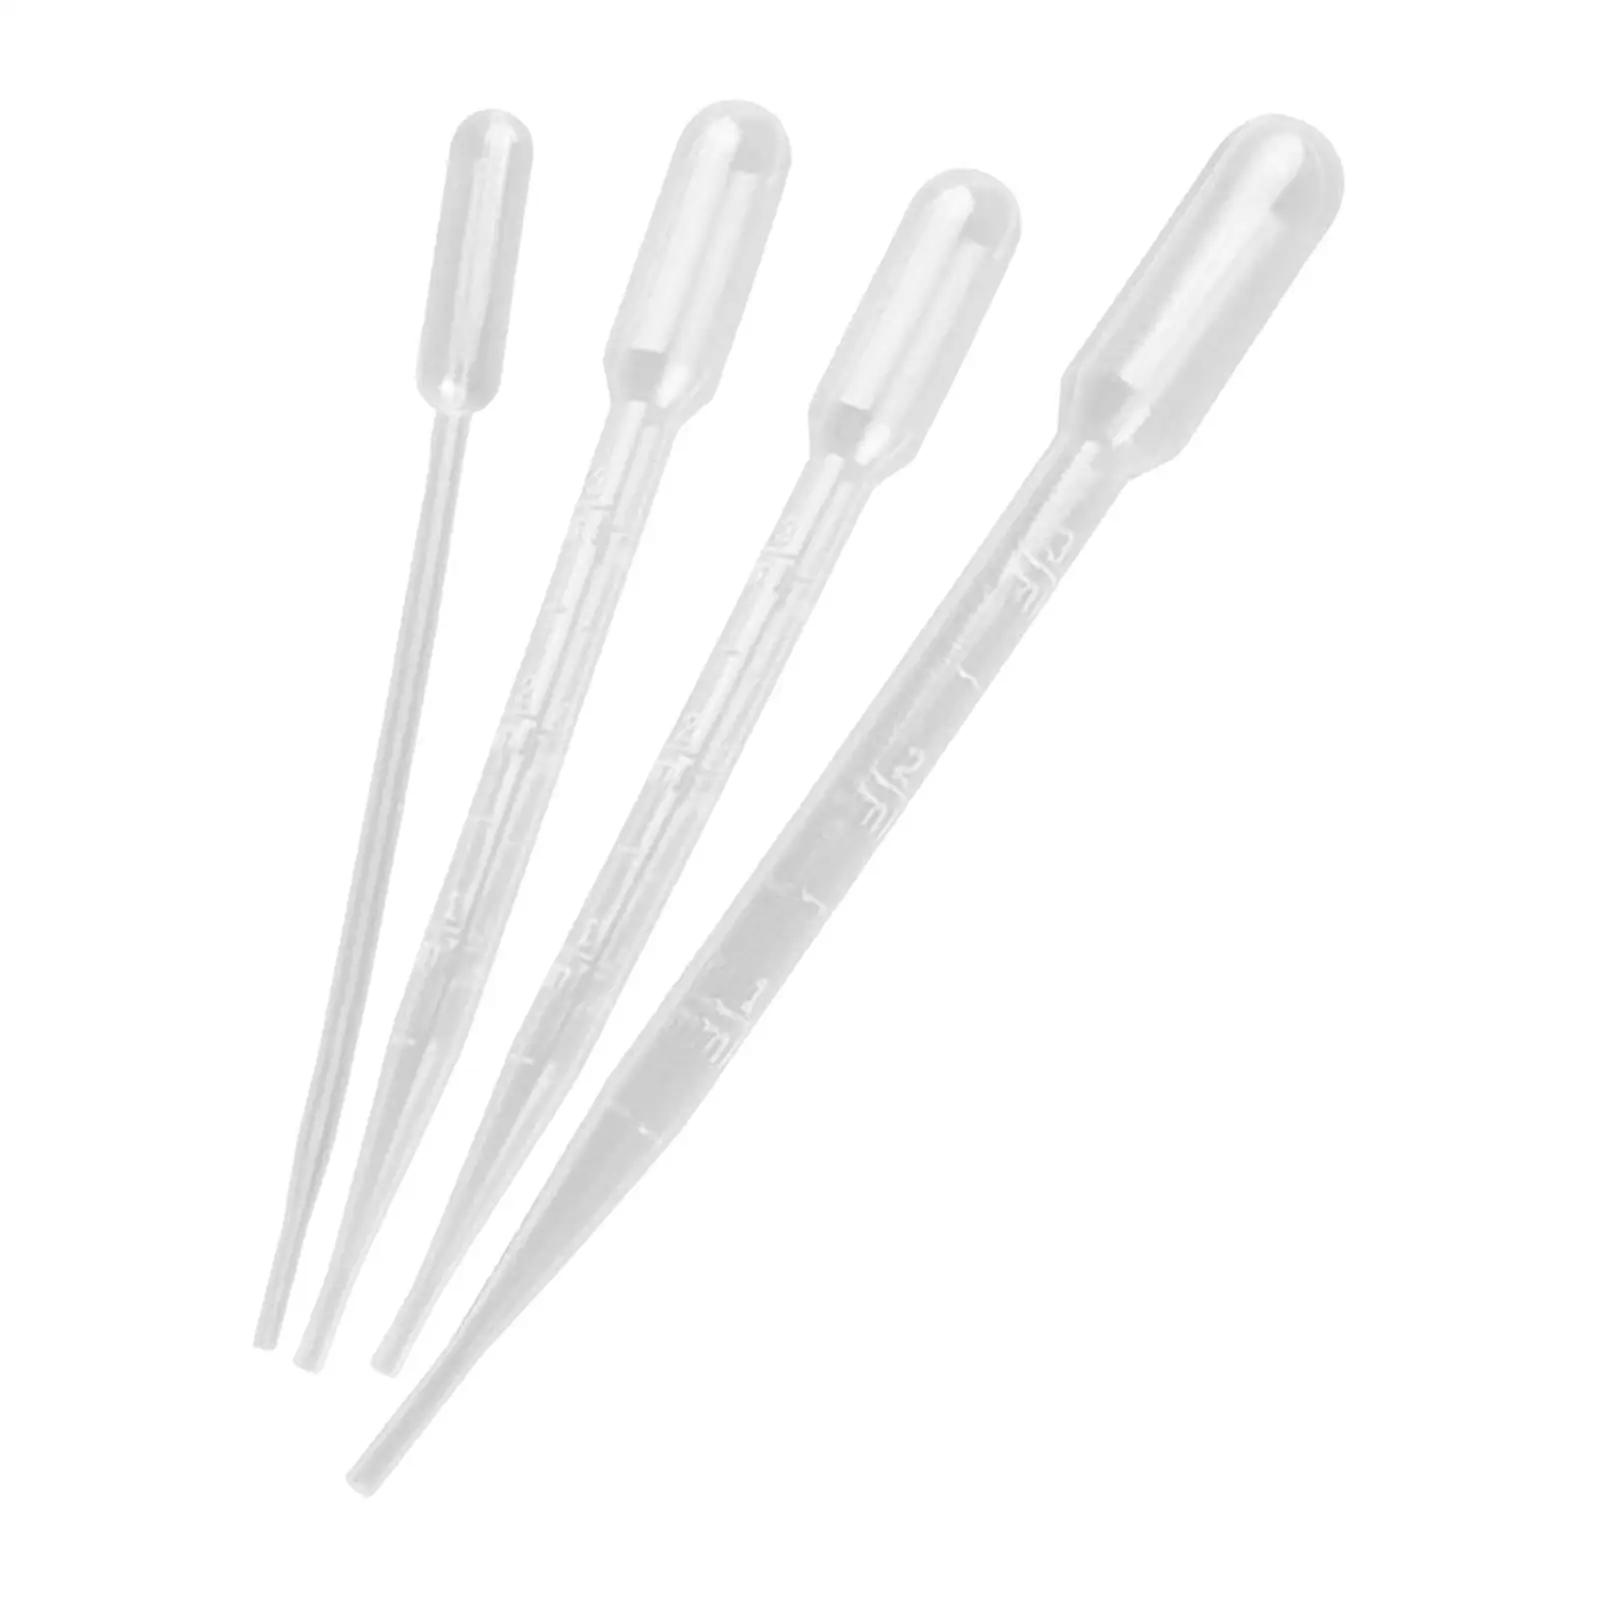 4x Model Coloring Dropper Clear Modeling Painting Tool Dropper Set for Hobby Building Tools